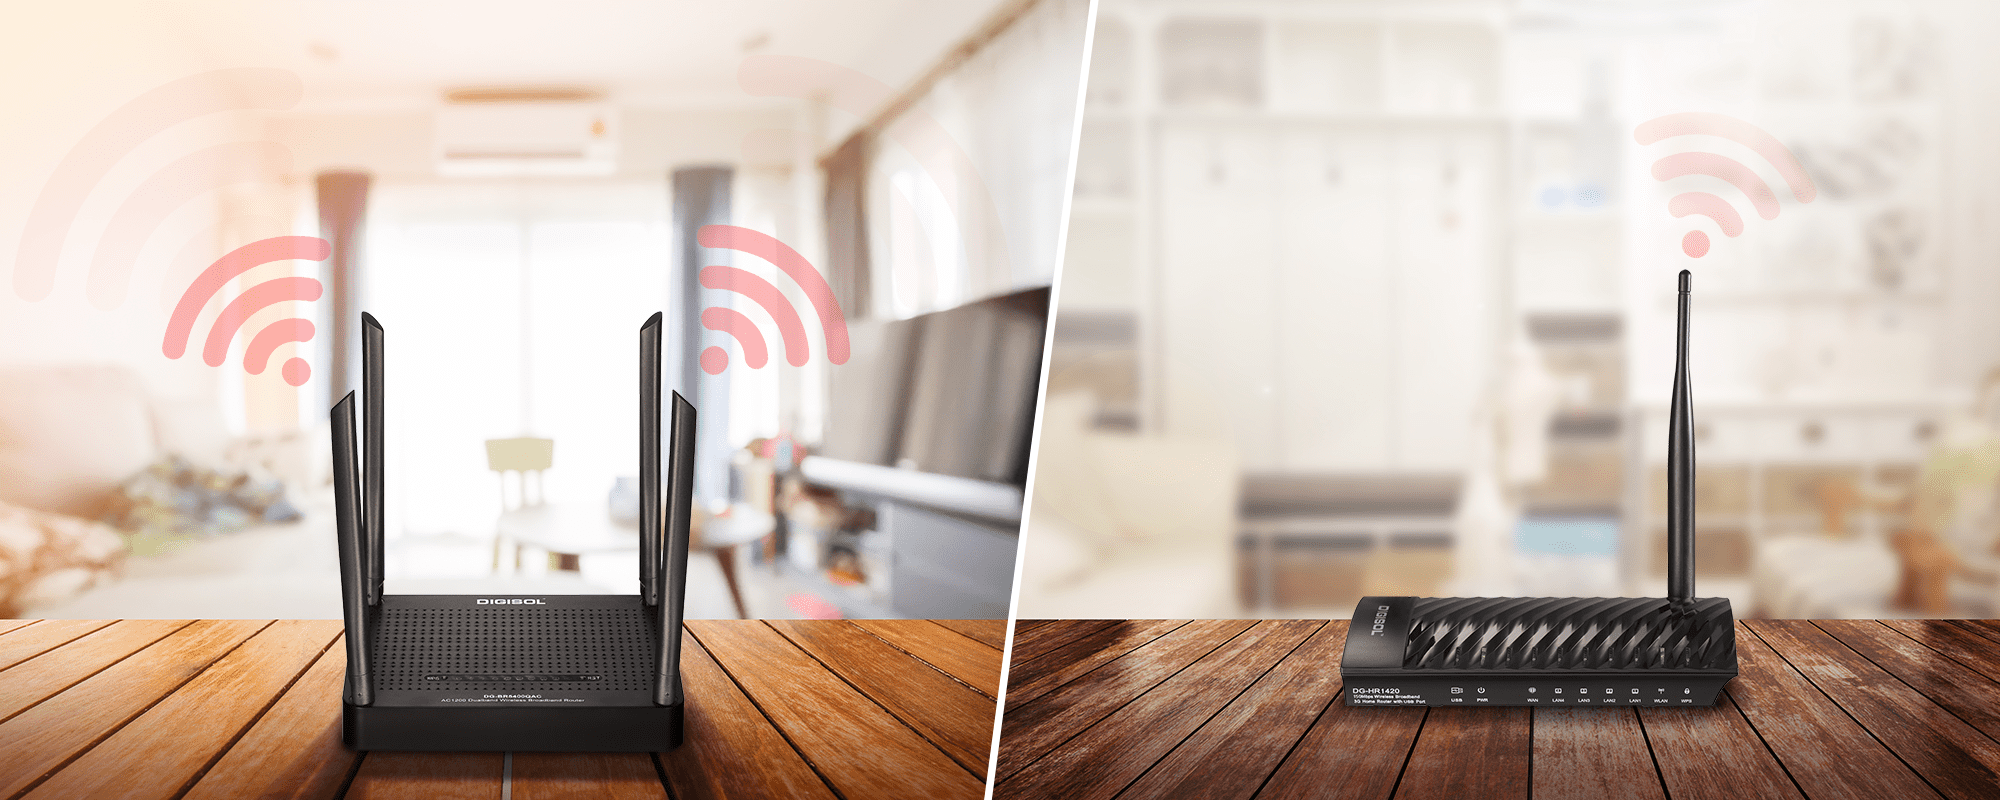 Optimise your home network- Get the right router for you - Digisol